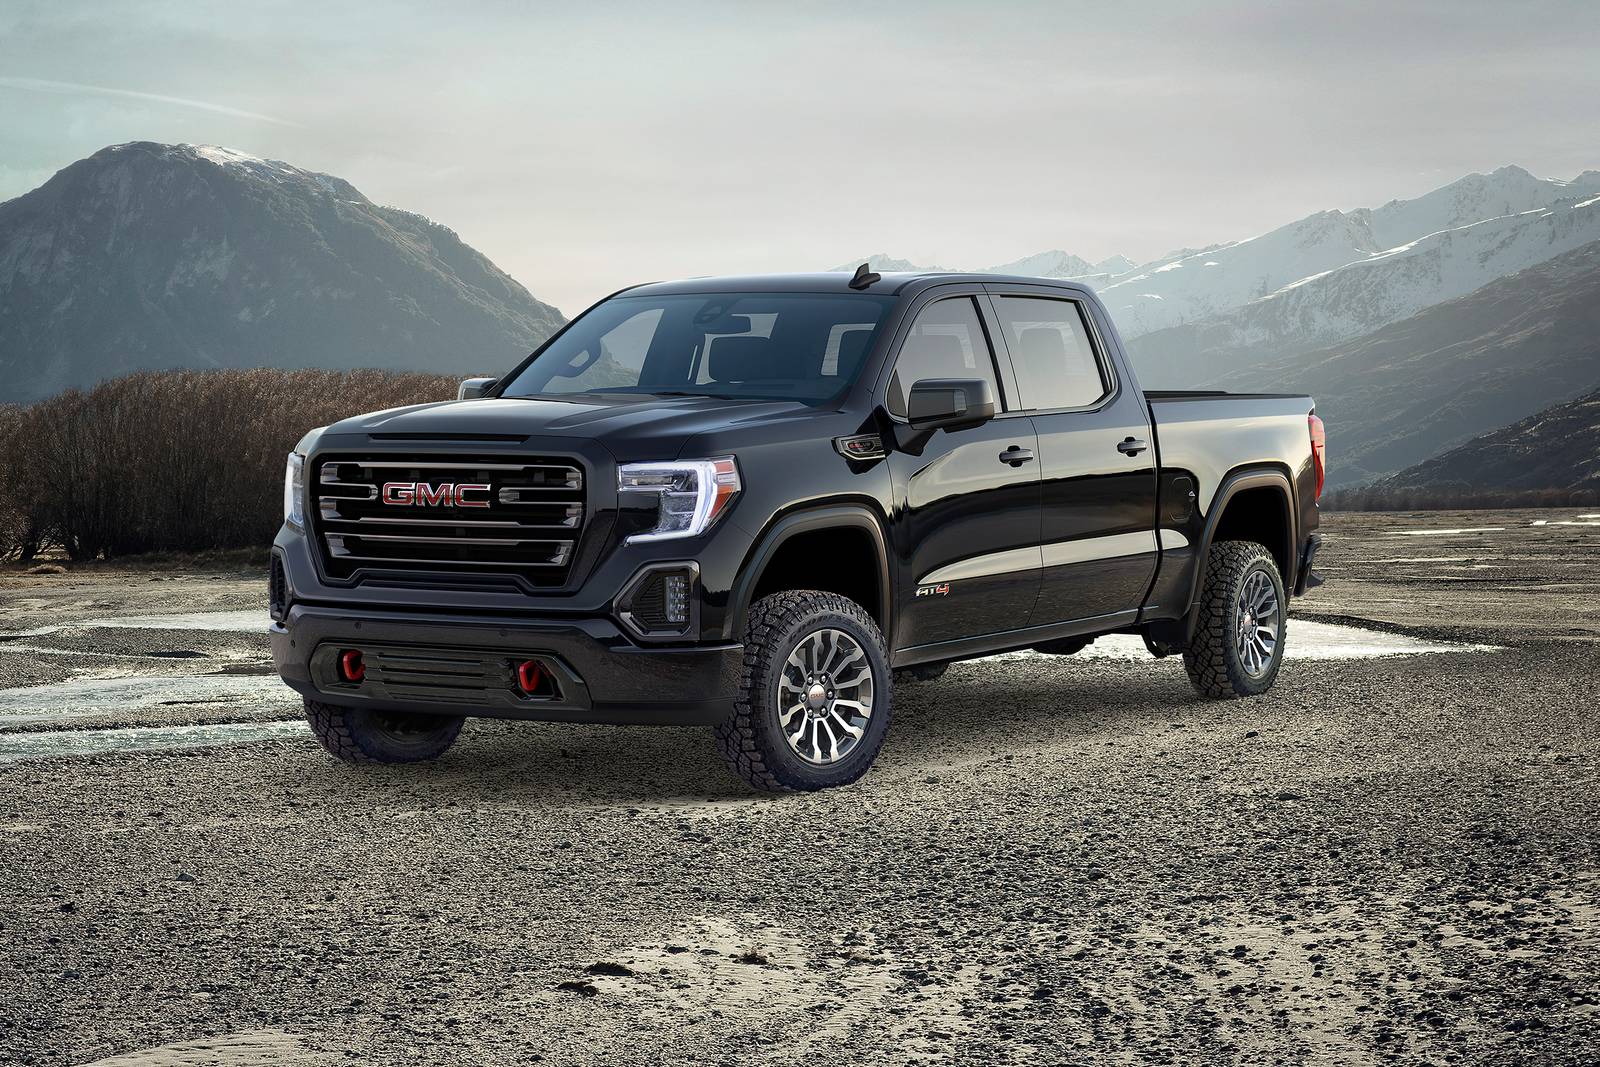 Used 2020 GMC Sierra 1500 Crew Cab Review | Edmunds